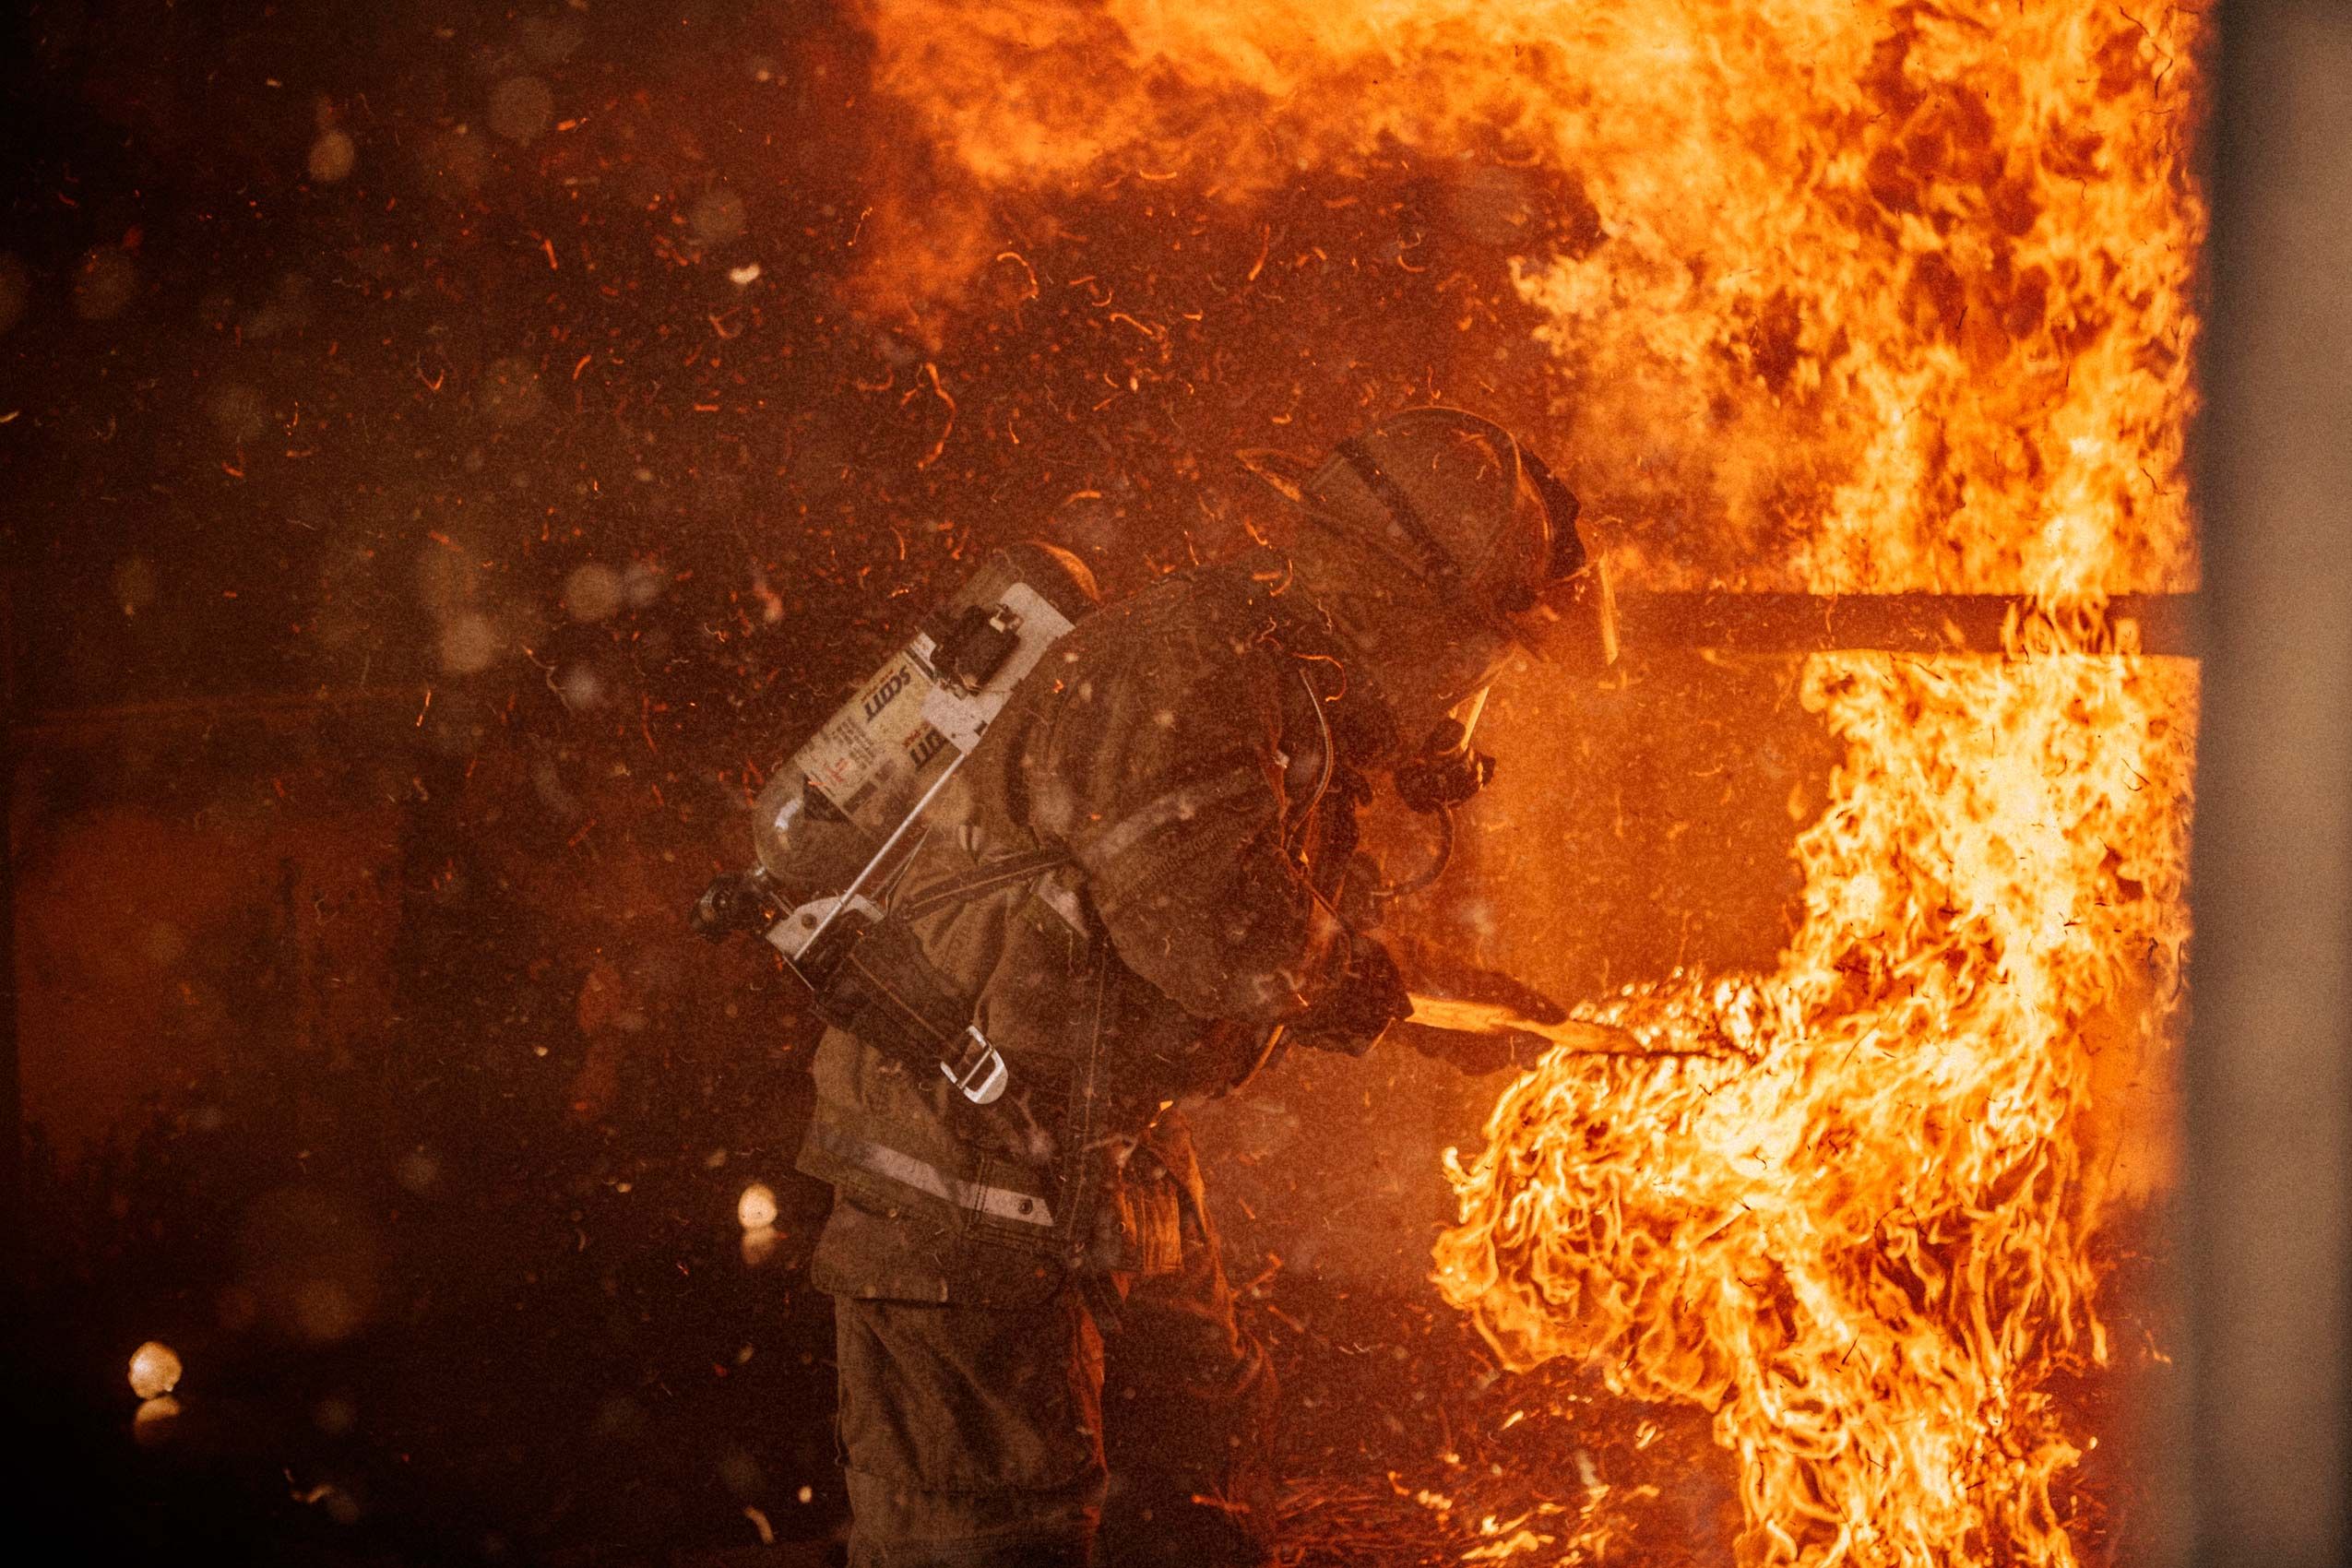 Fireman Putting Out Fire Surrounded By Flames